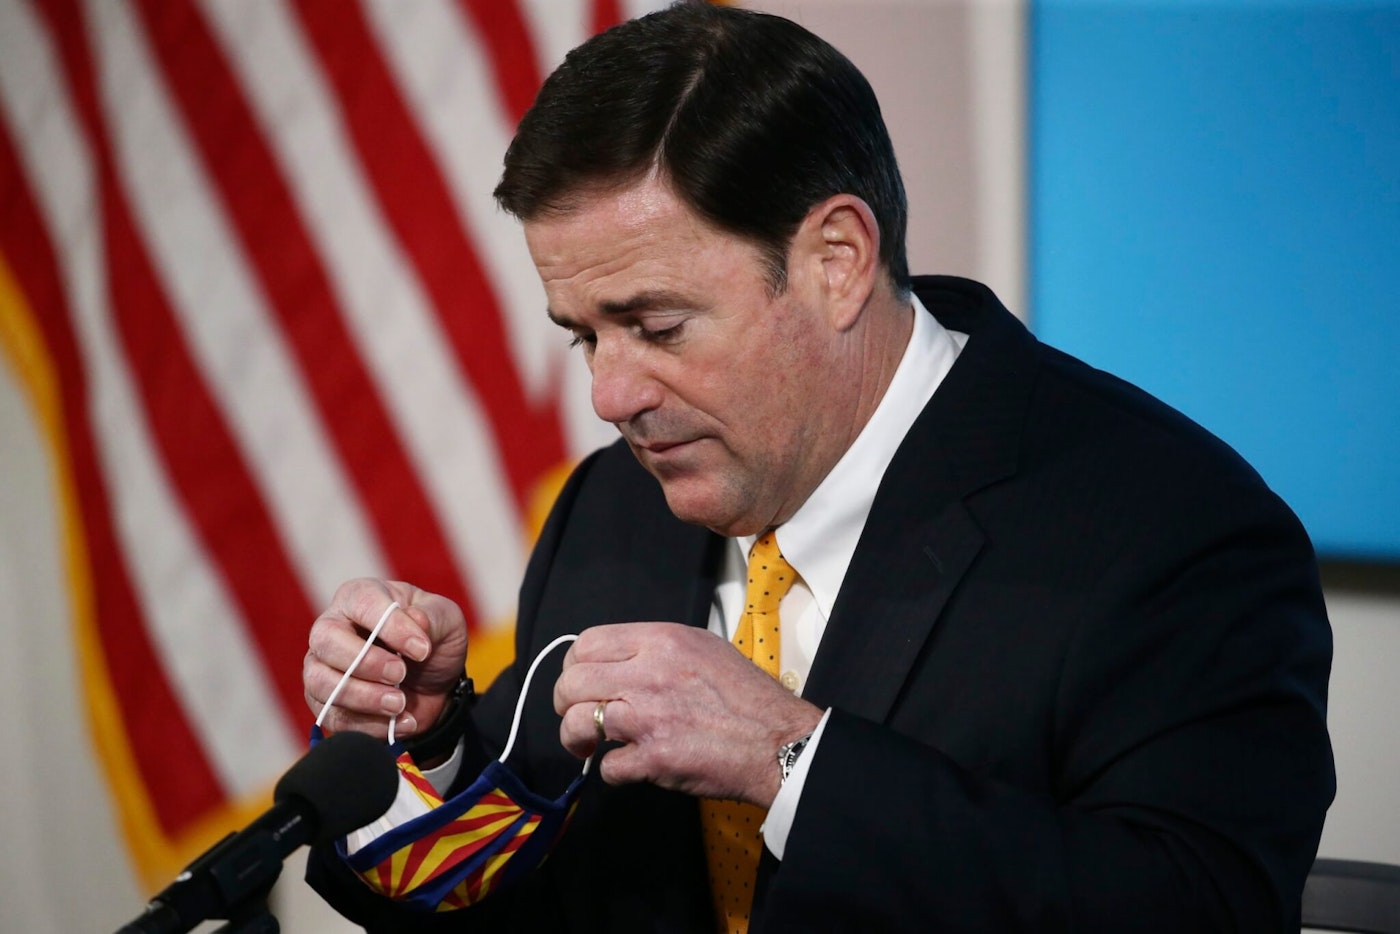 Arizona Republican Gov. Doug Ducey removes his face covering as he prepares to speak about the latest coronavirus data at a news conference Thursday, June 25, 2020, in Phoenix. (AP Photo/Ross D. Franklin, Pool)